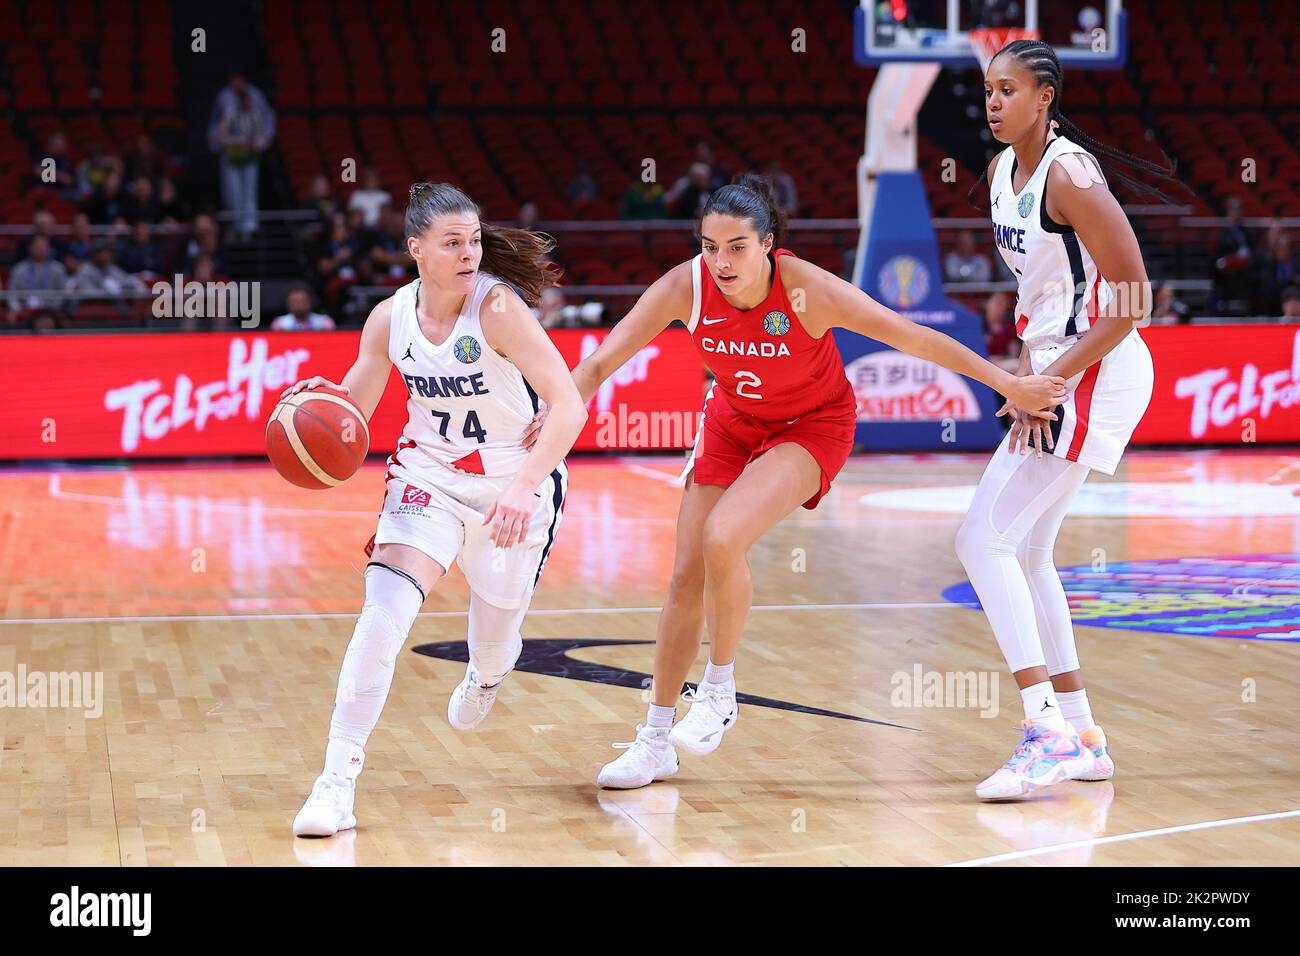 23rd September 2022; Sydney, Homebush, New South Wales, Australia, Women's World Cup Basketball: Canada versus France: Marie-Eve PAGET of France evades the attention of Aislinn KONIG of Canada Stock Photo